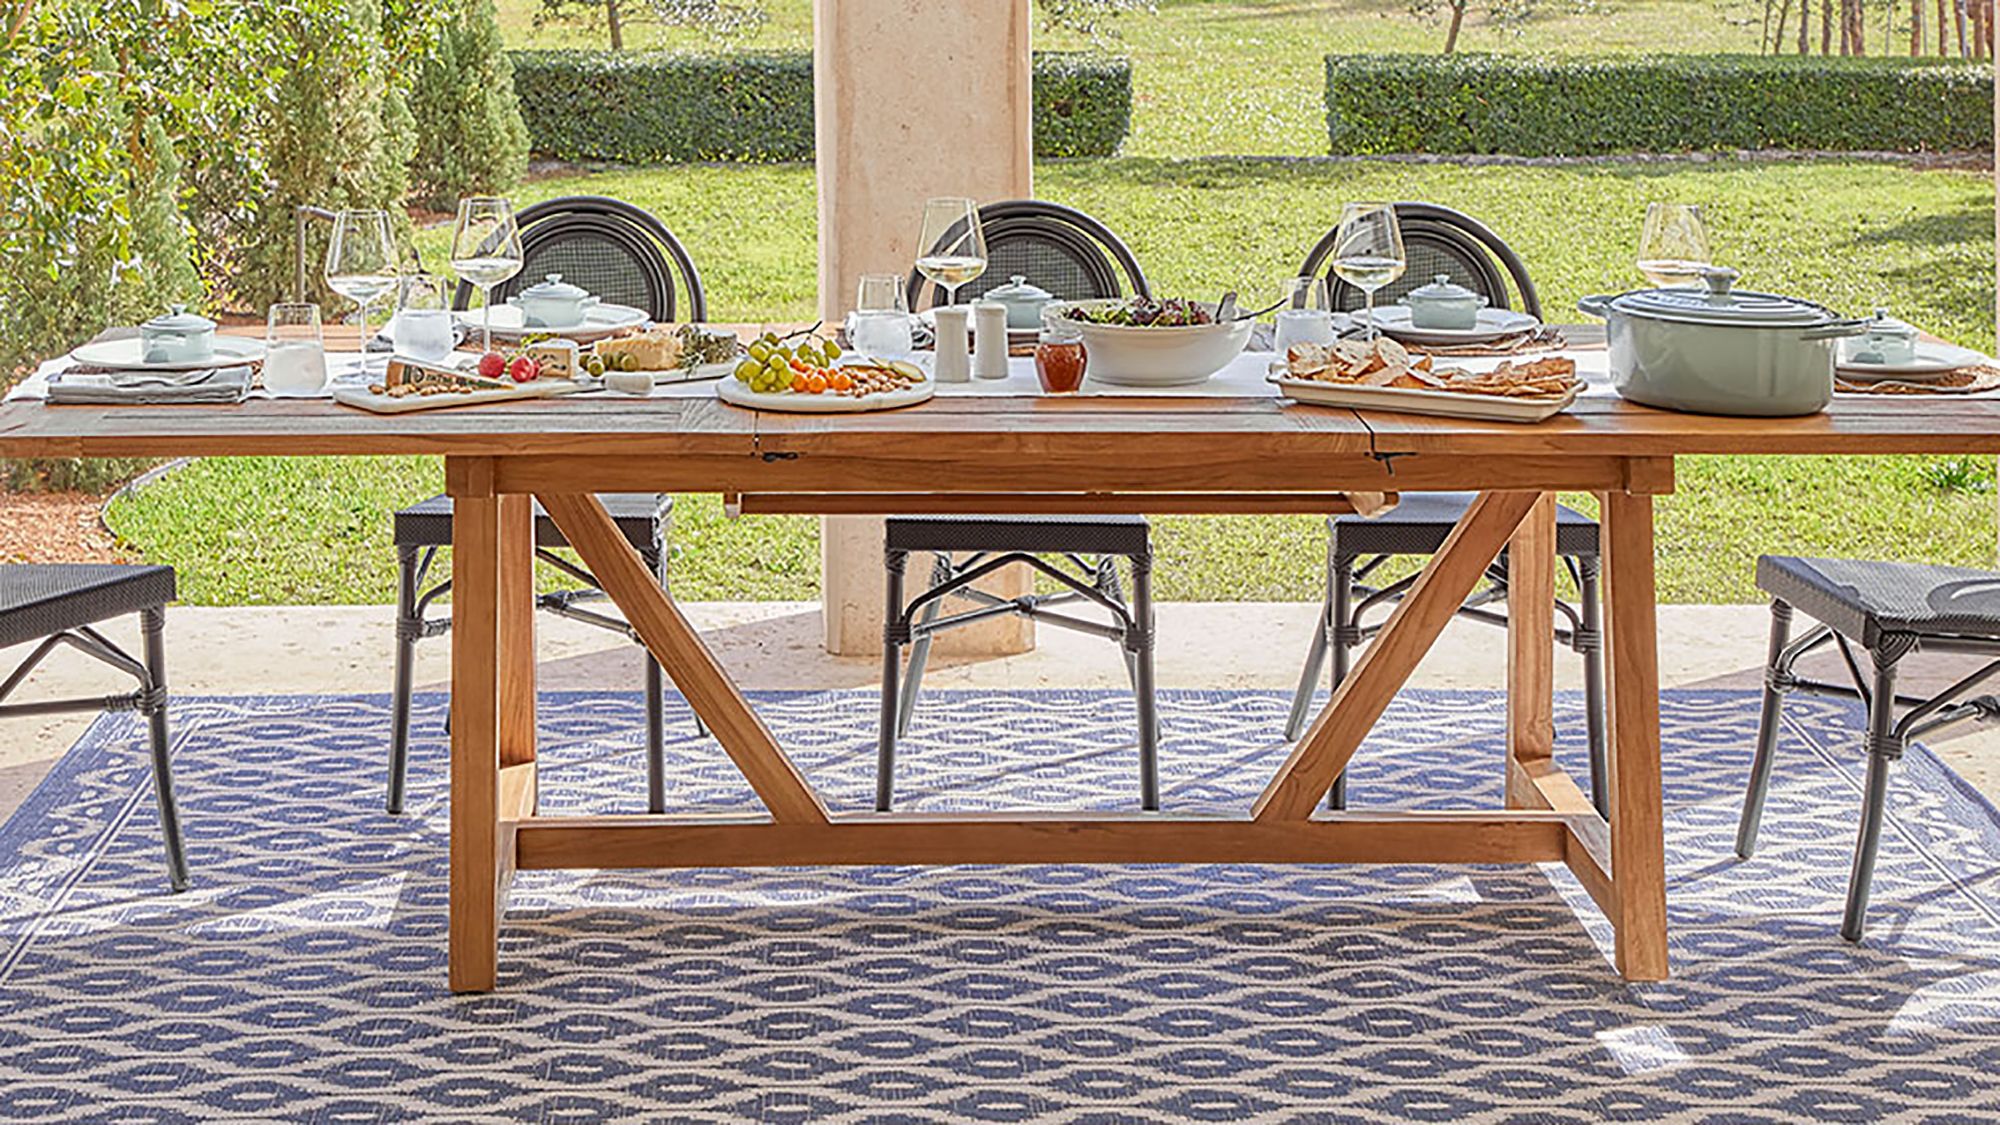 Sur La Table just launched its first furniture collections for all things outdoor entertaining | CNN Underscored